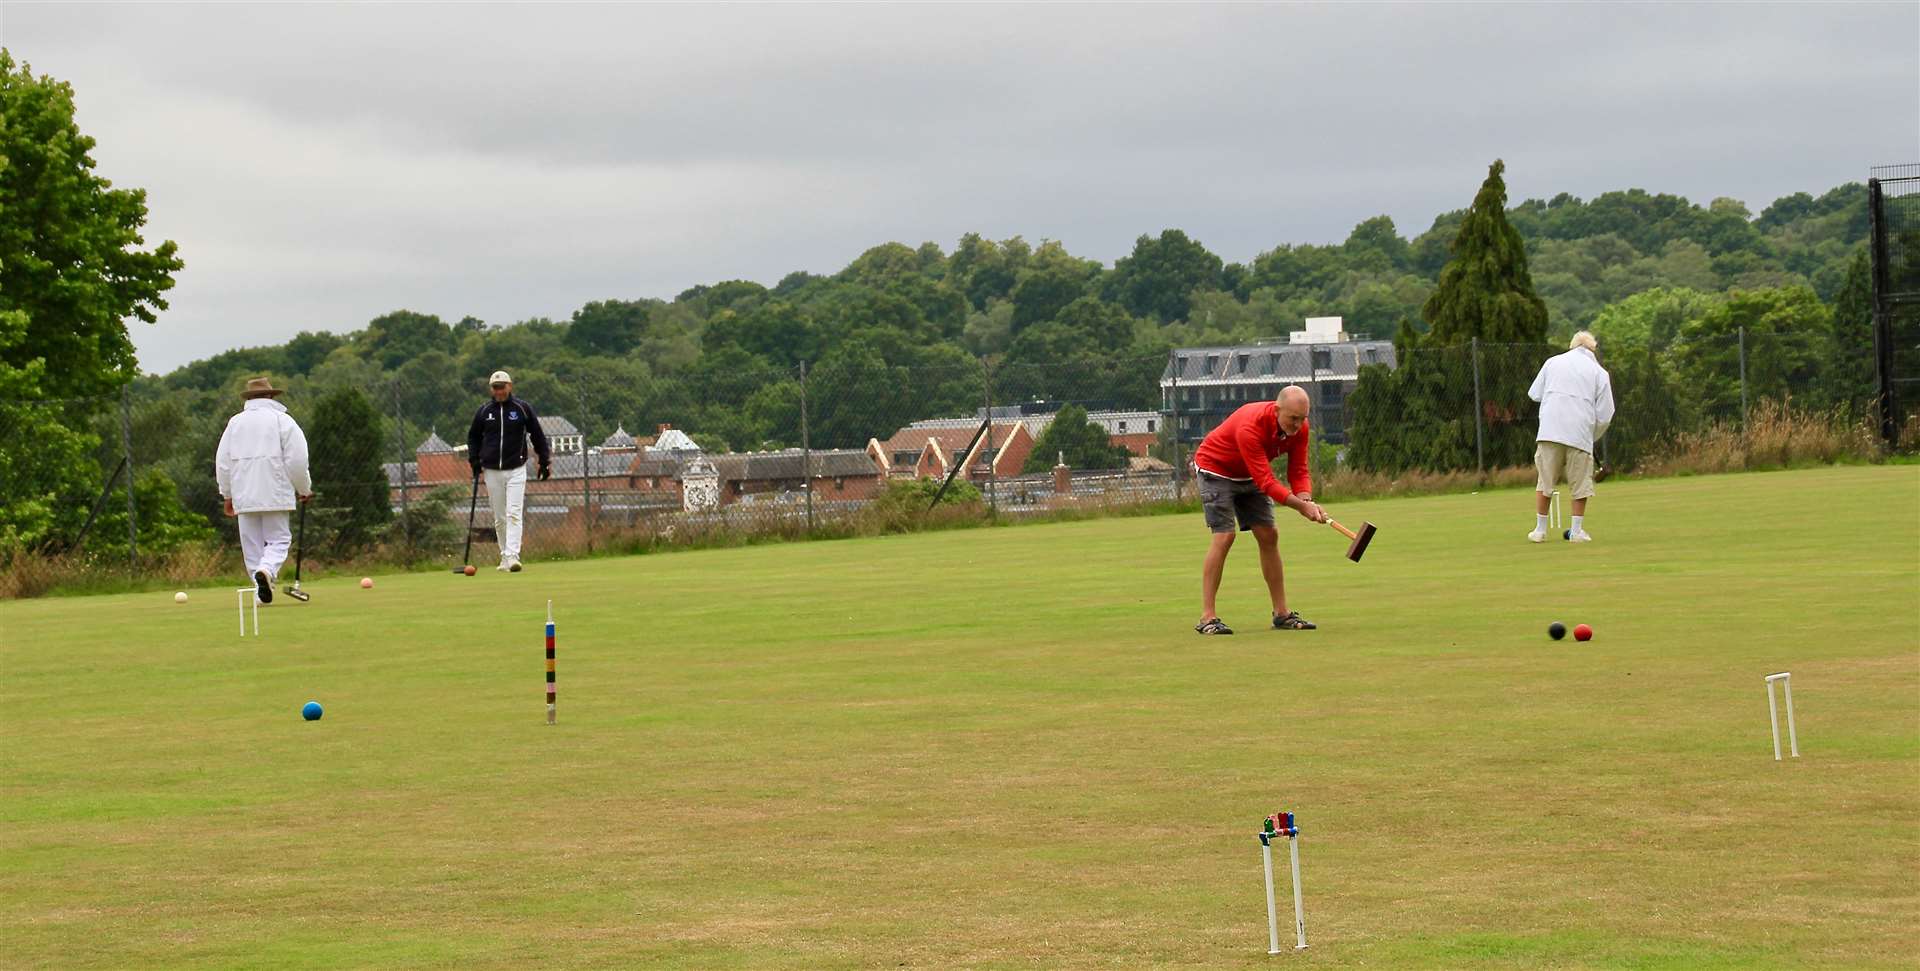 The first croquet tournament at the Tunbridge Wells Croquet Club since the Covid lockdown